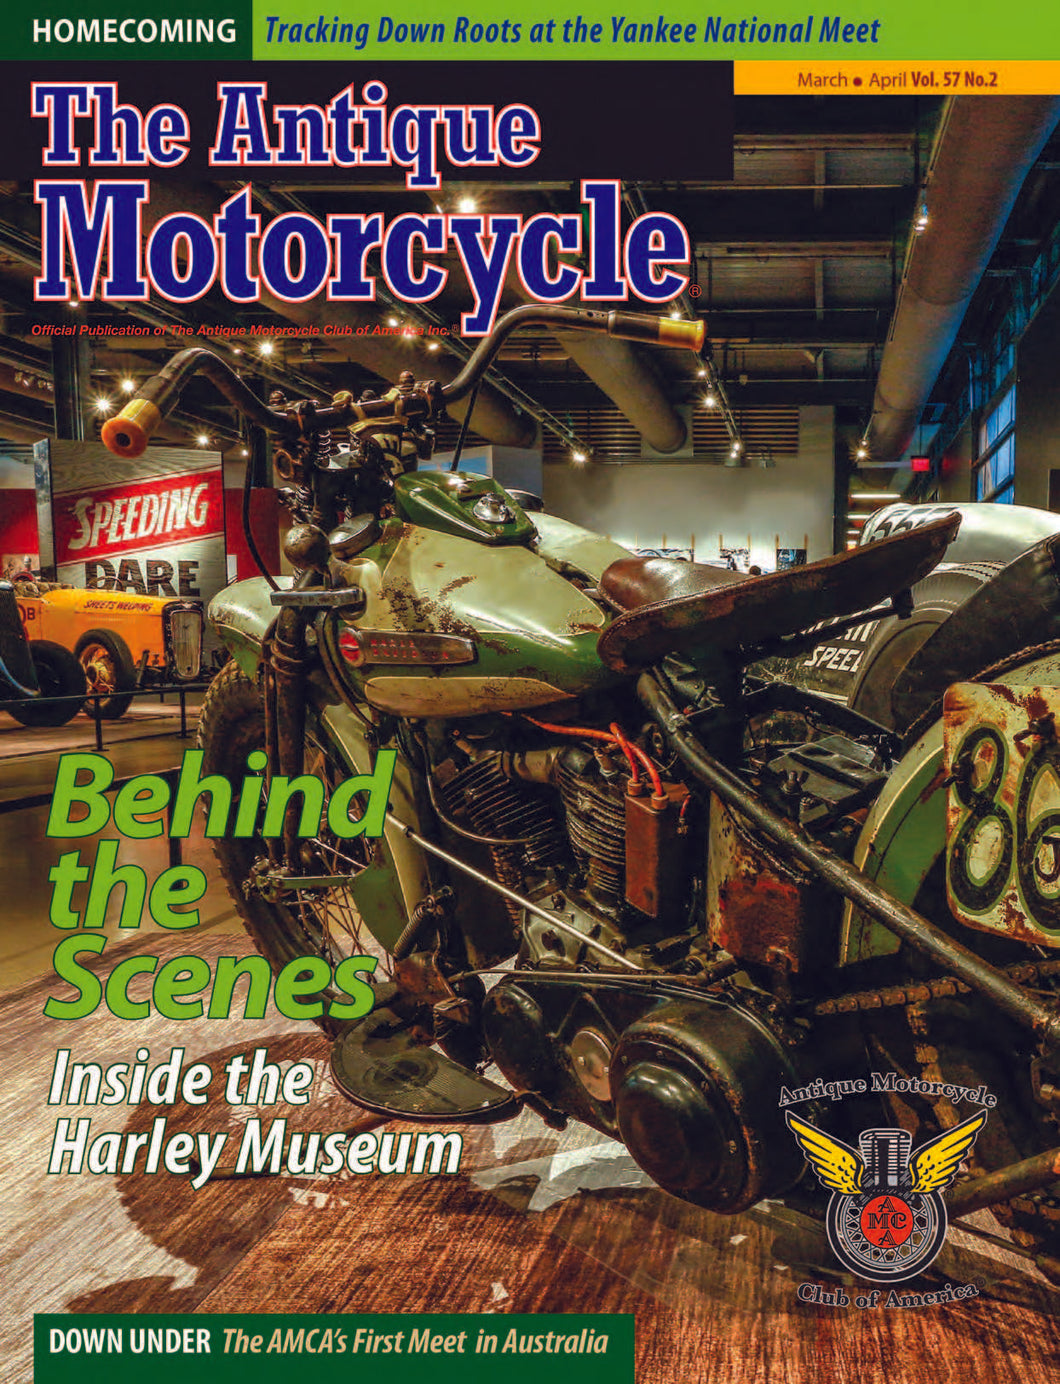 The Antique Motorcycle: Vol. 57, Iss. 2 - Mar/Apr 2018 Magazine